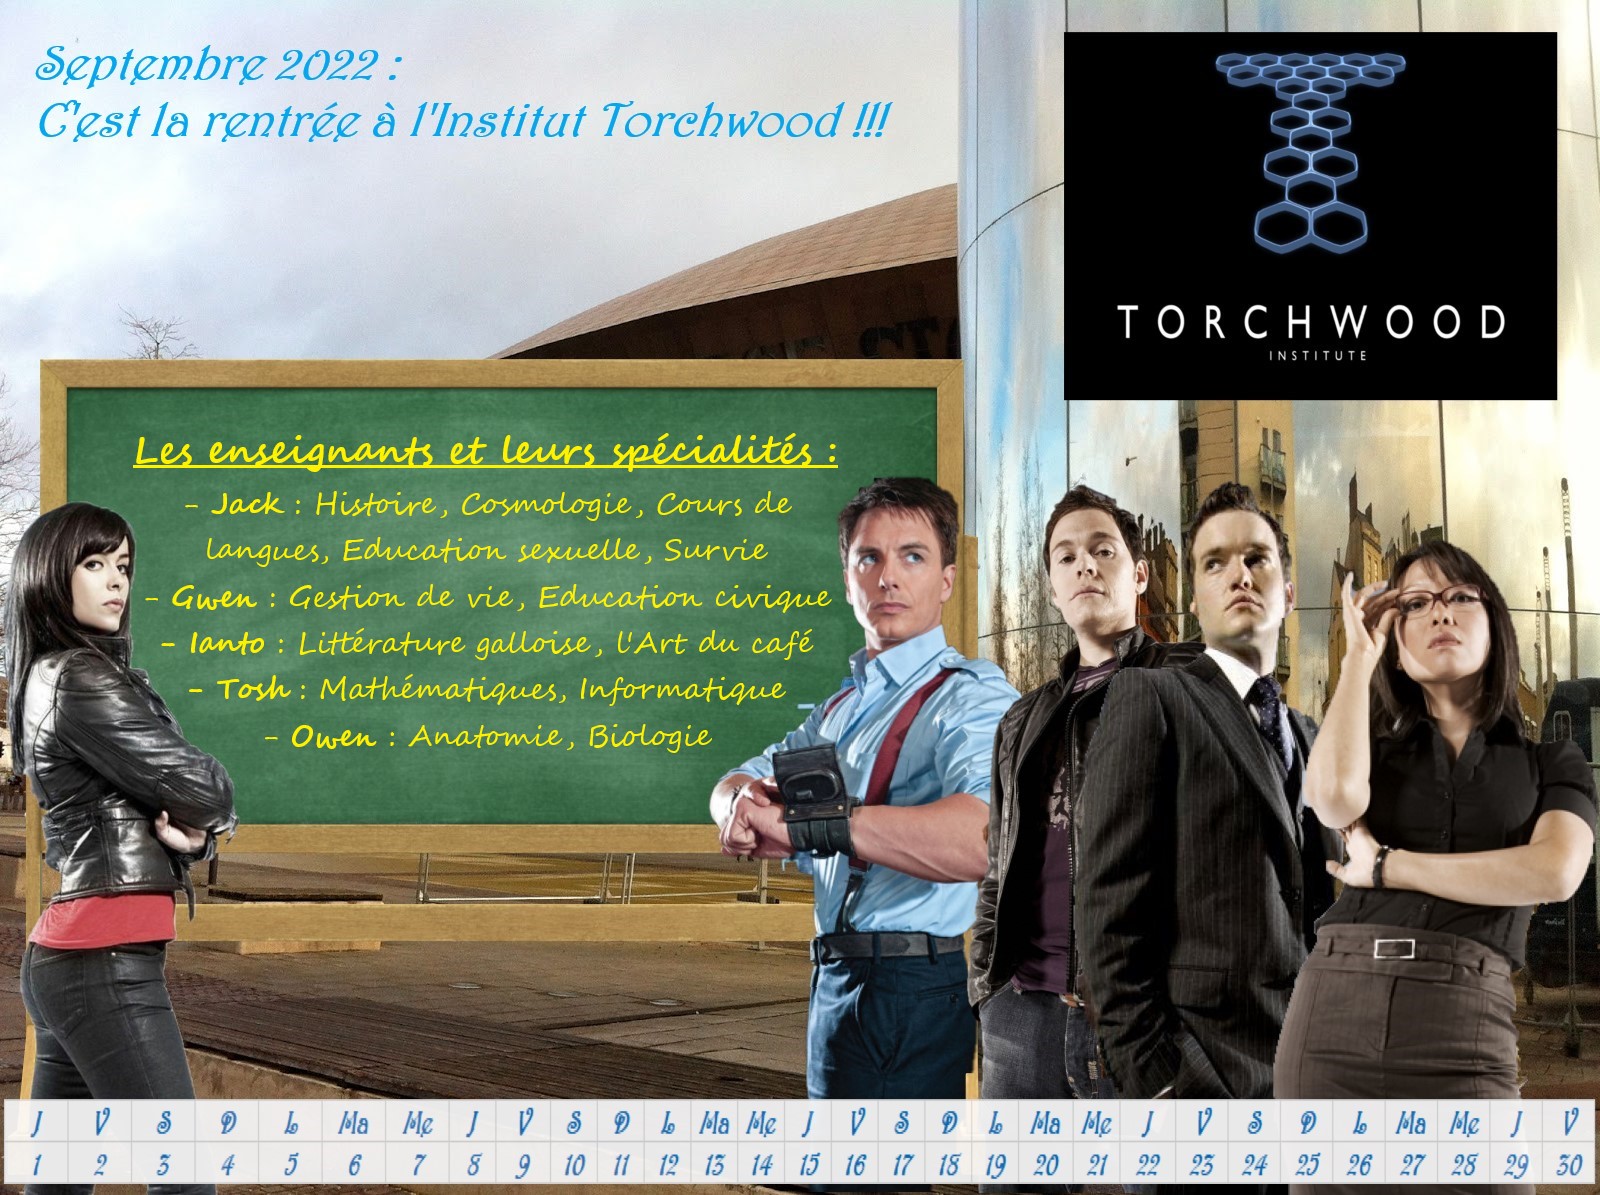 Calendrier Torchwood : Septembre 2022